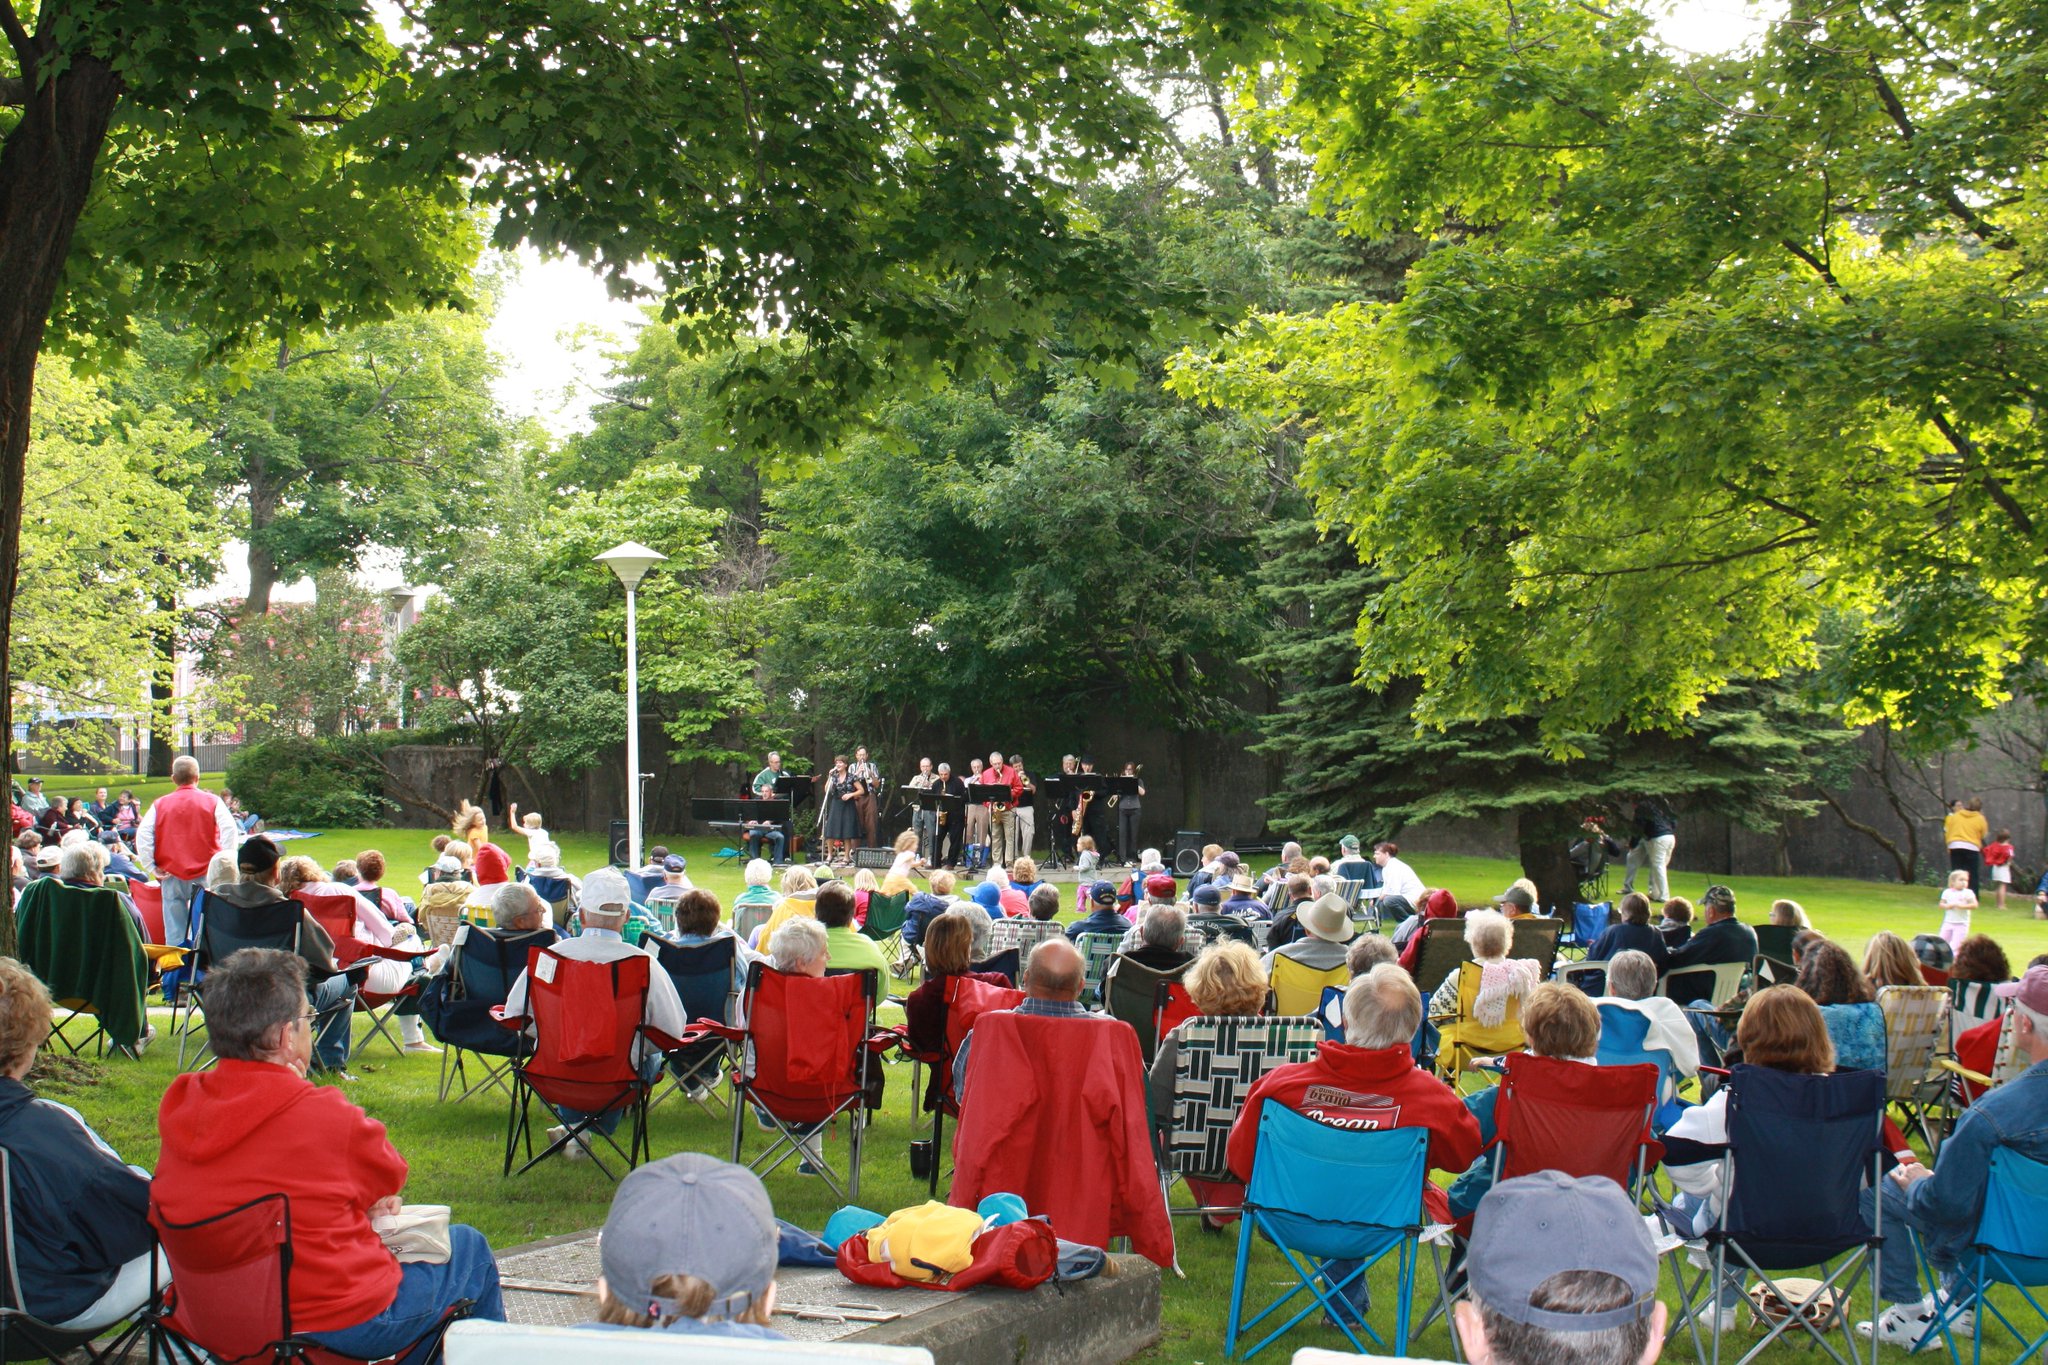 Music in the Park | Downtown Sault Ste. Marie, Michigan!